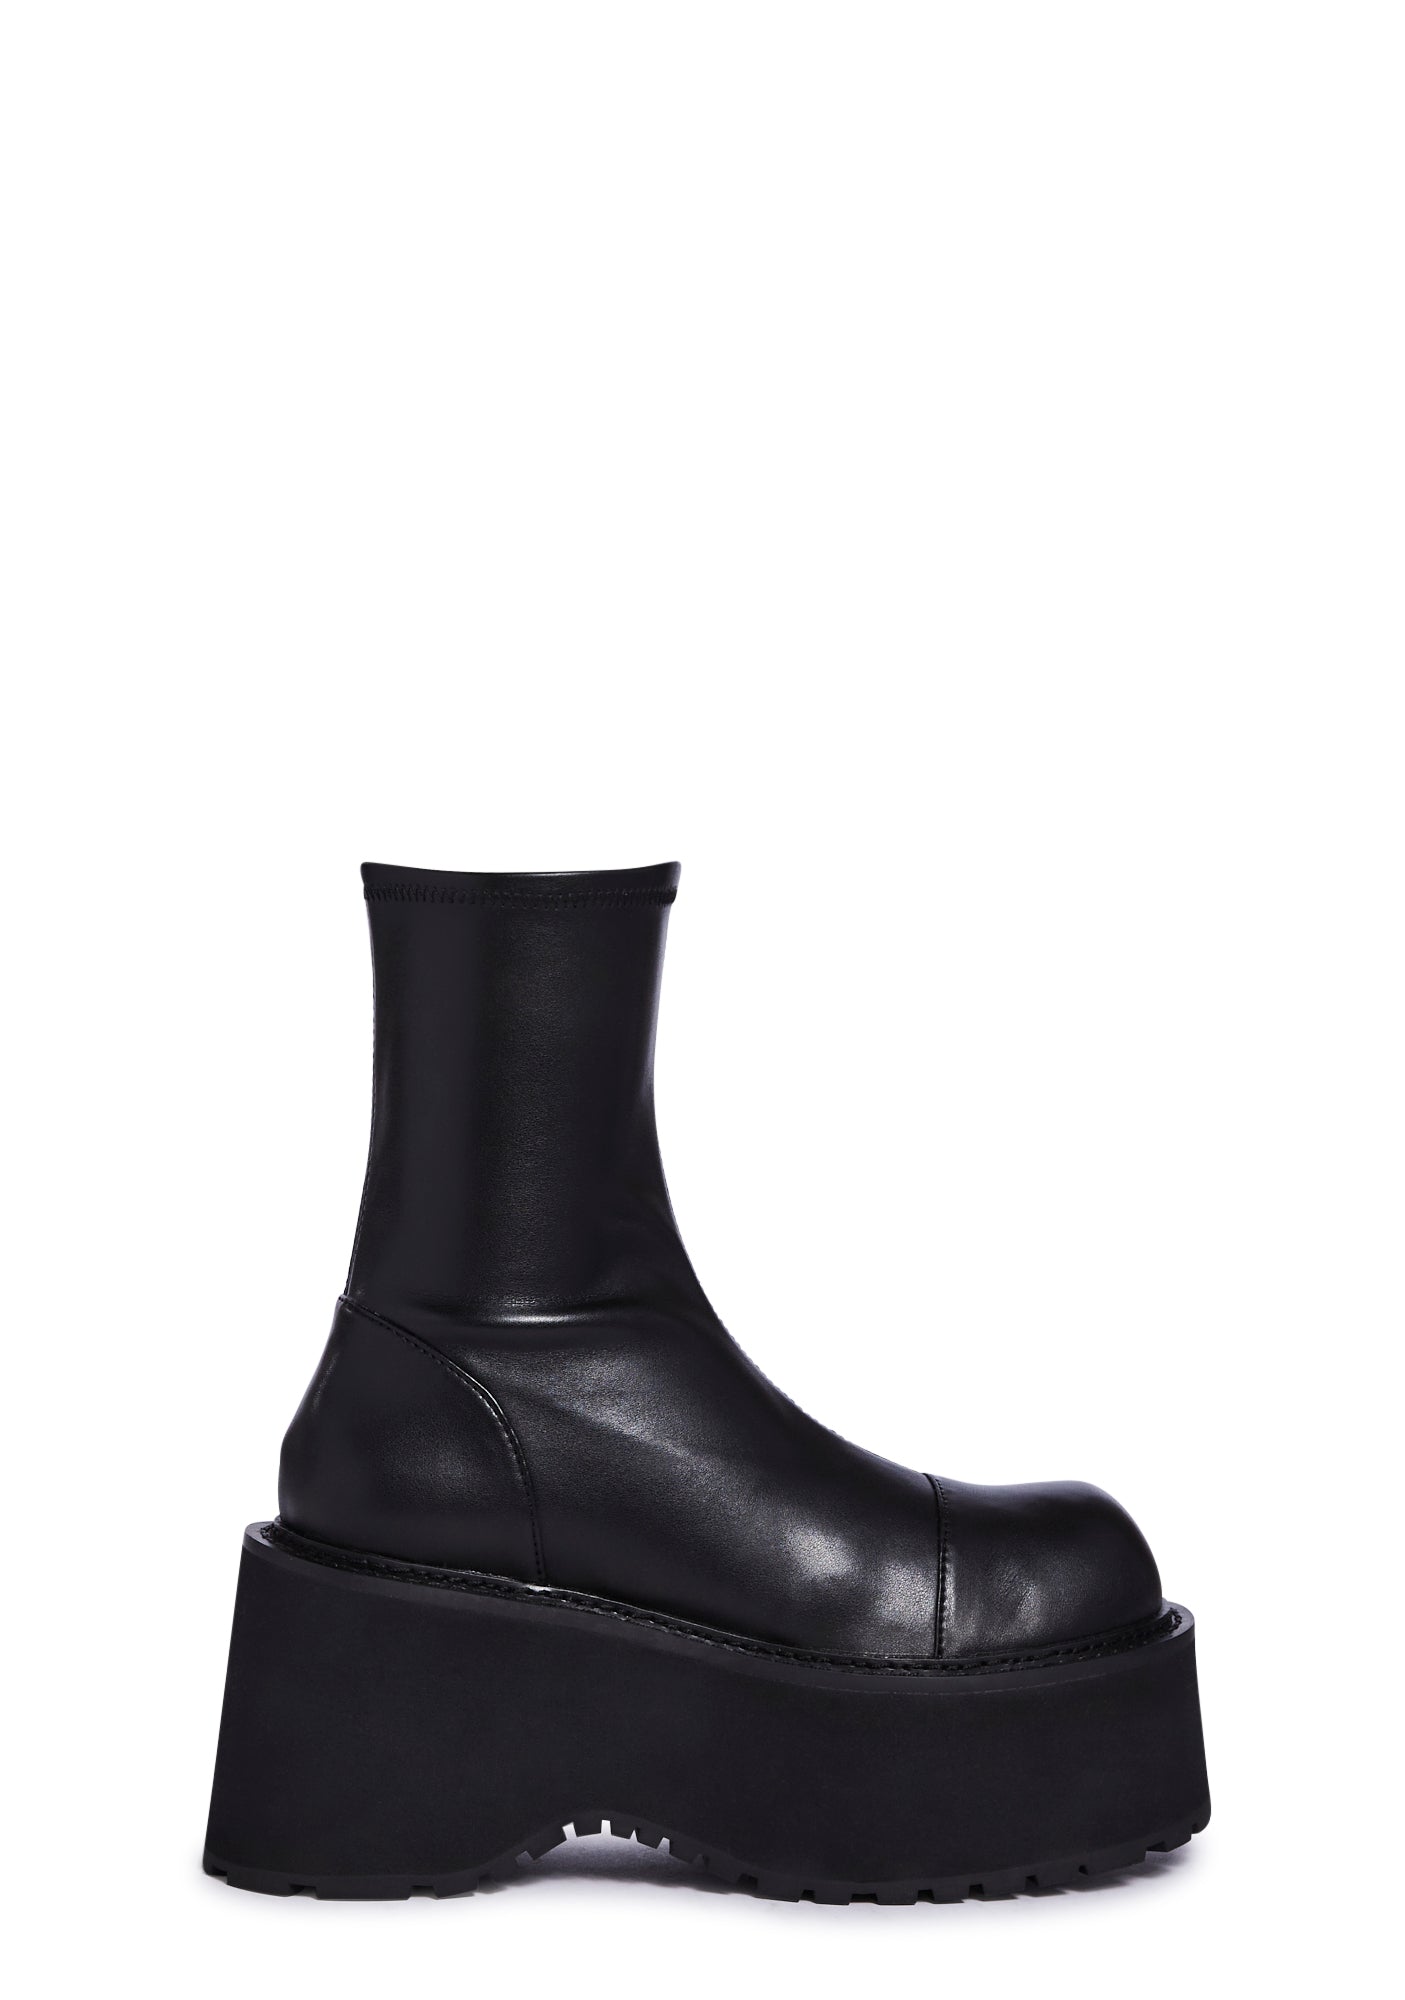 Current Mood Treaded Platform Boots With Side Zippers - Black – Dolls Kill